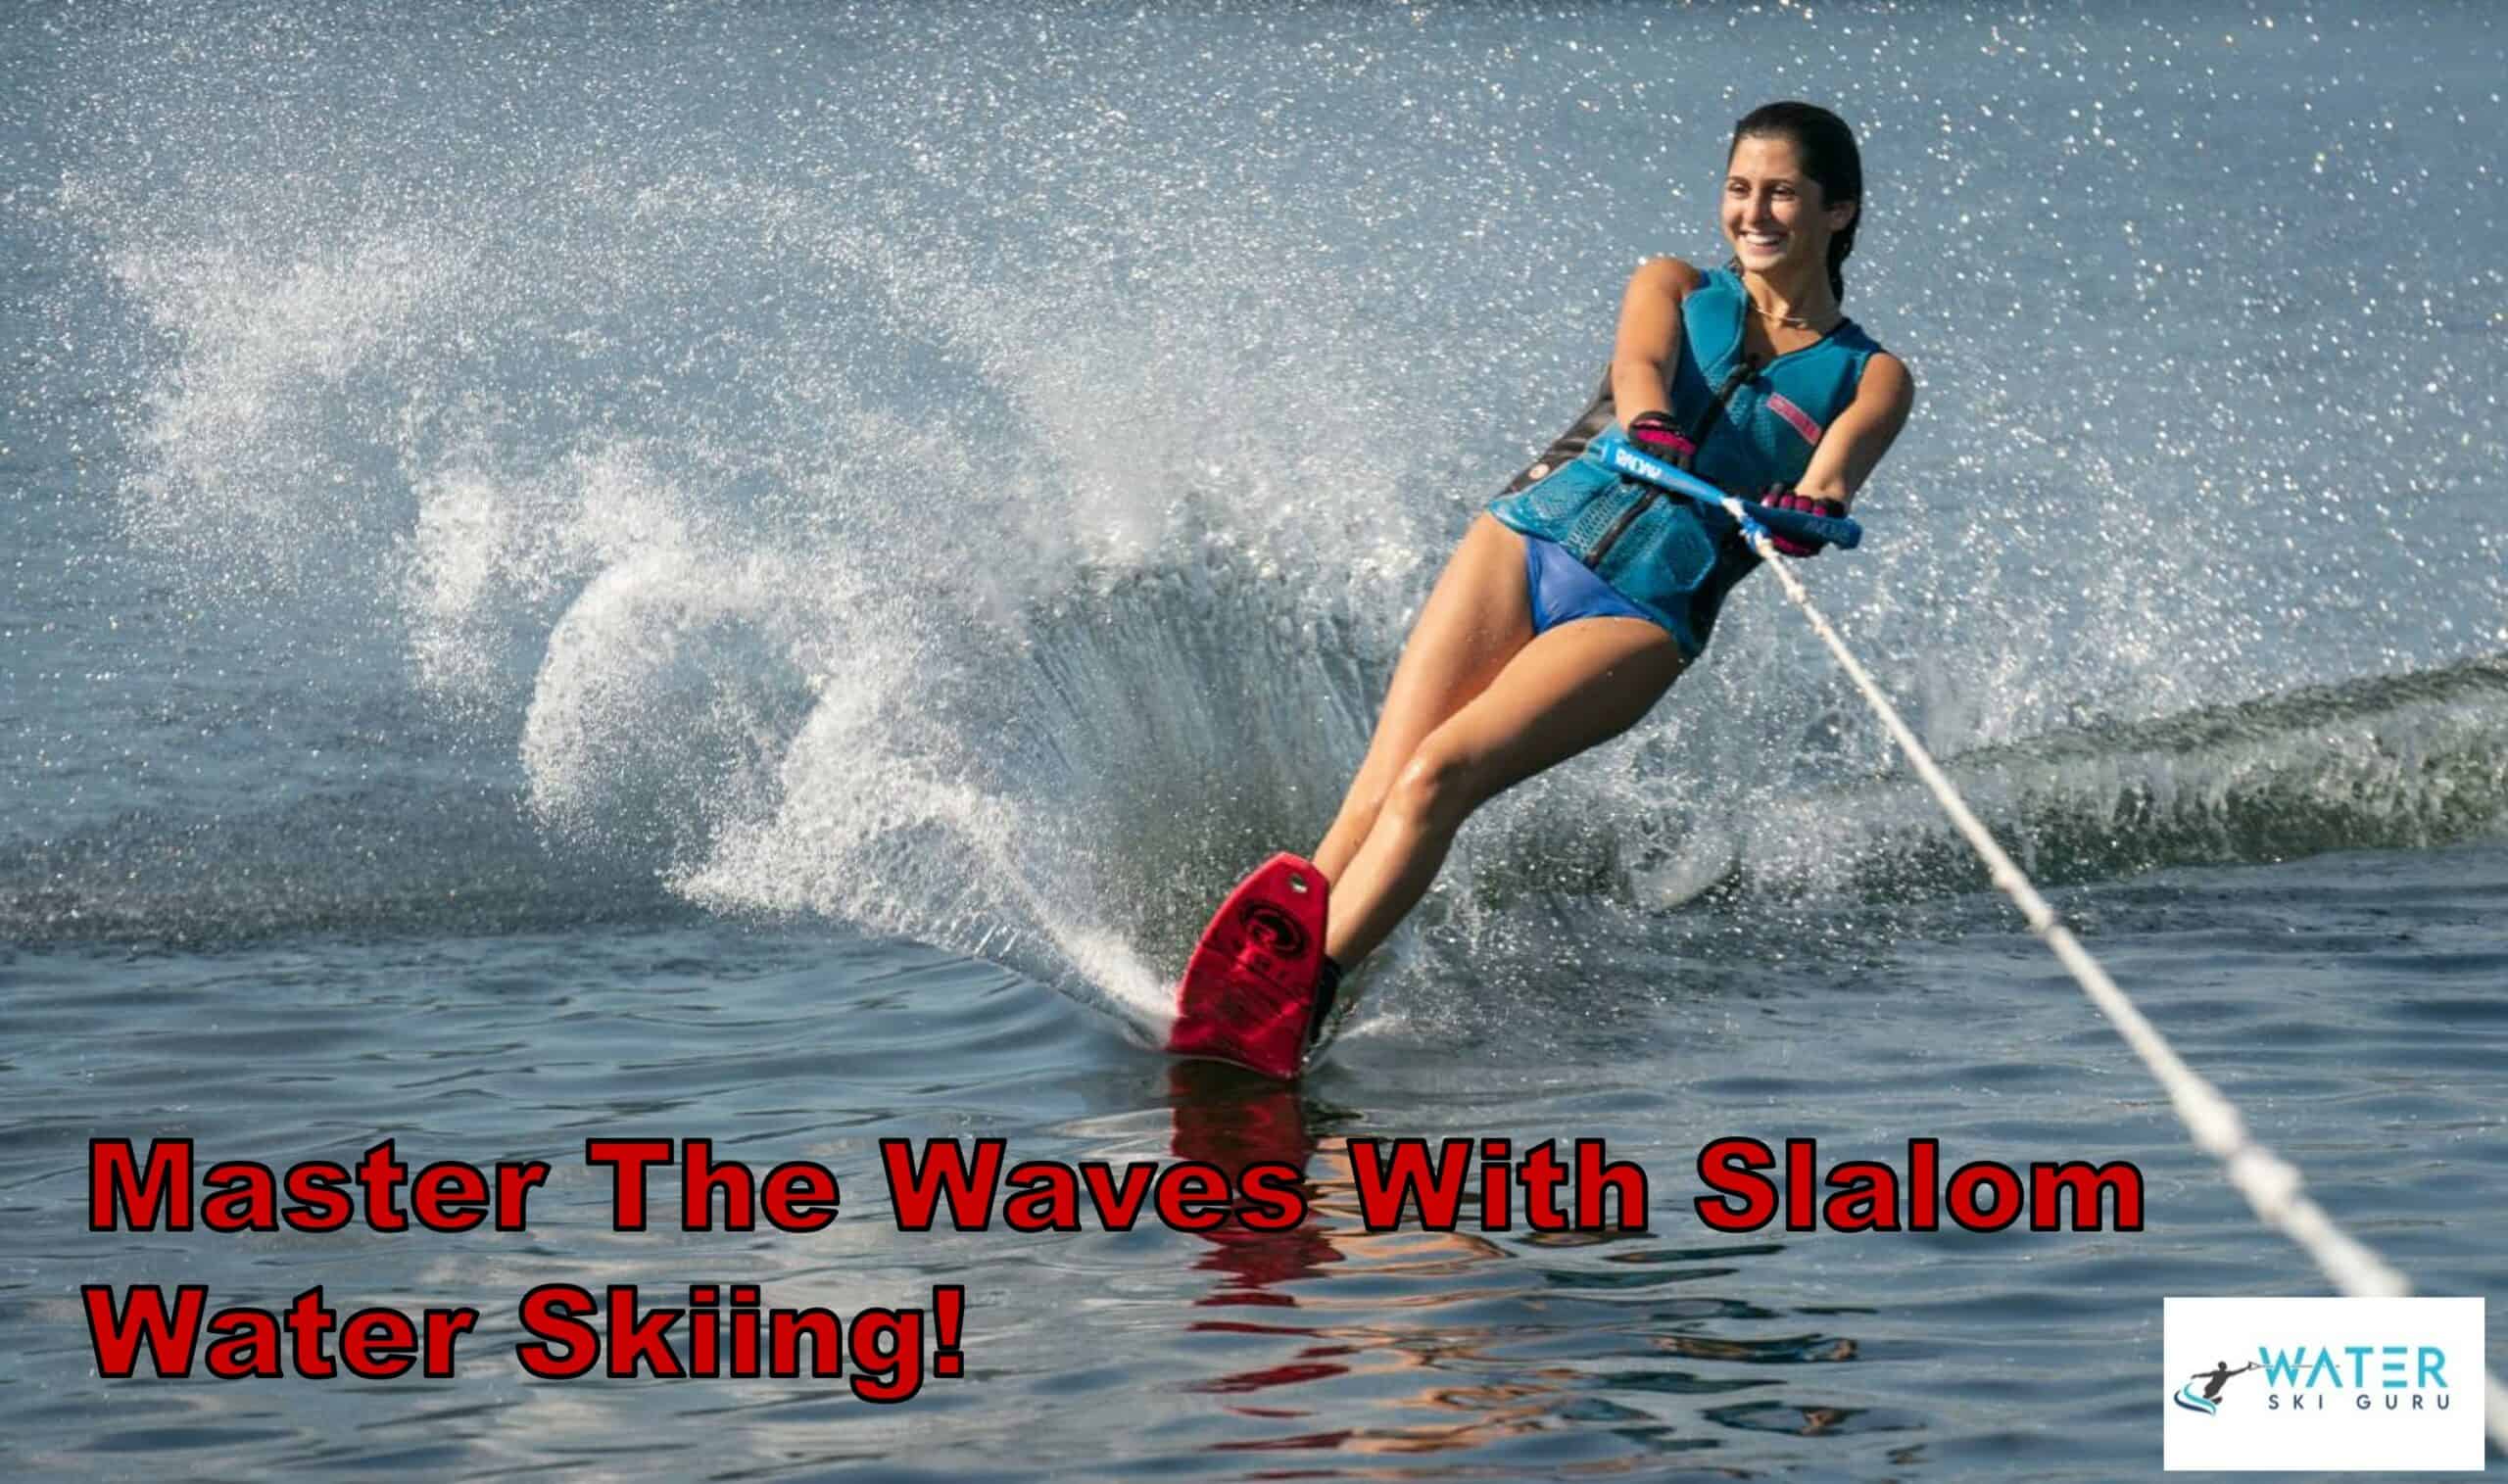 Master the Waves with Slalom Water Skiing!